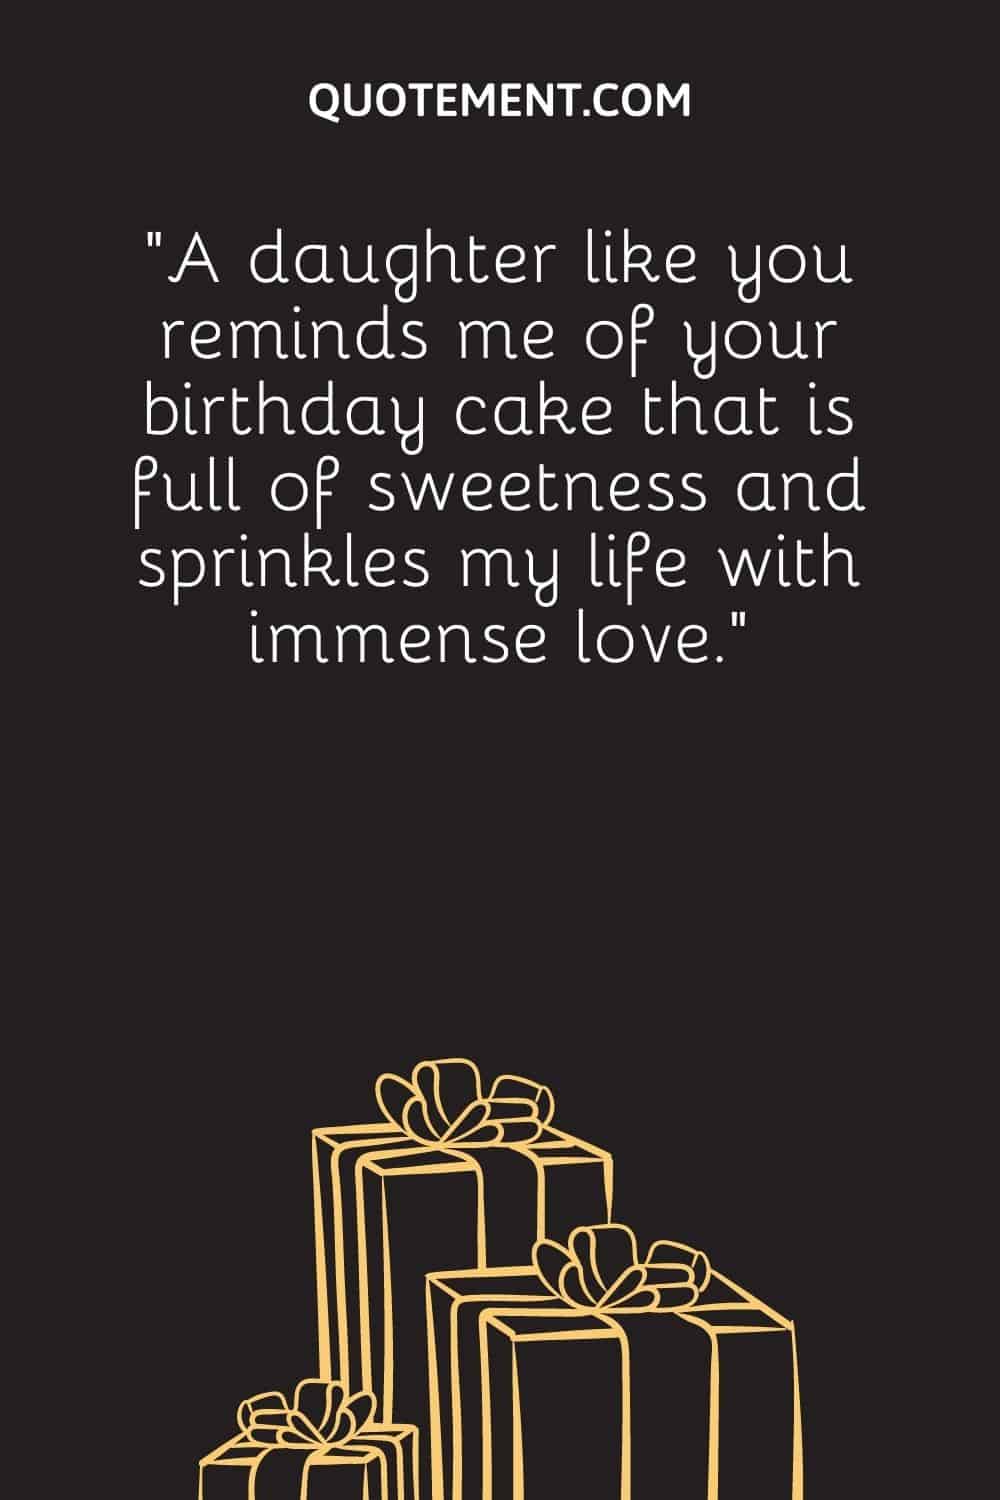 “A daughter like you reminds me of your birthday cake that is full of sweetness and sprinkles my life with immense love.”